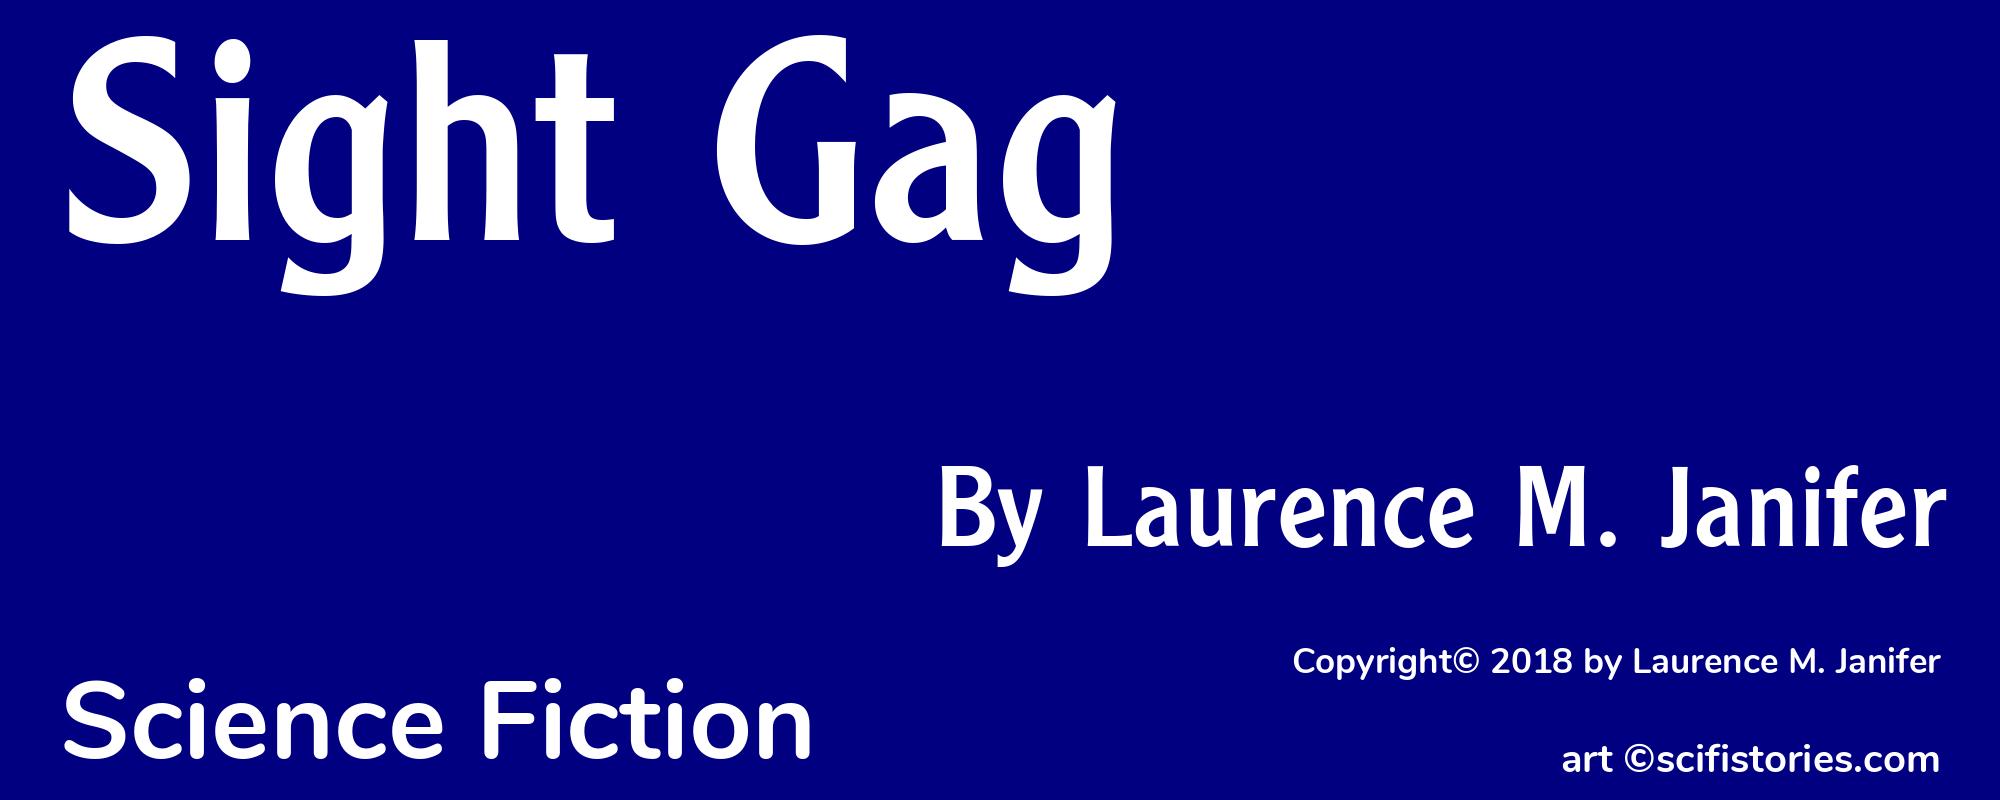 Sight Gag - Cover